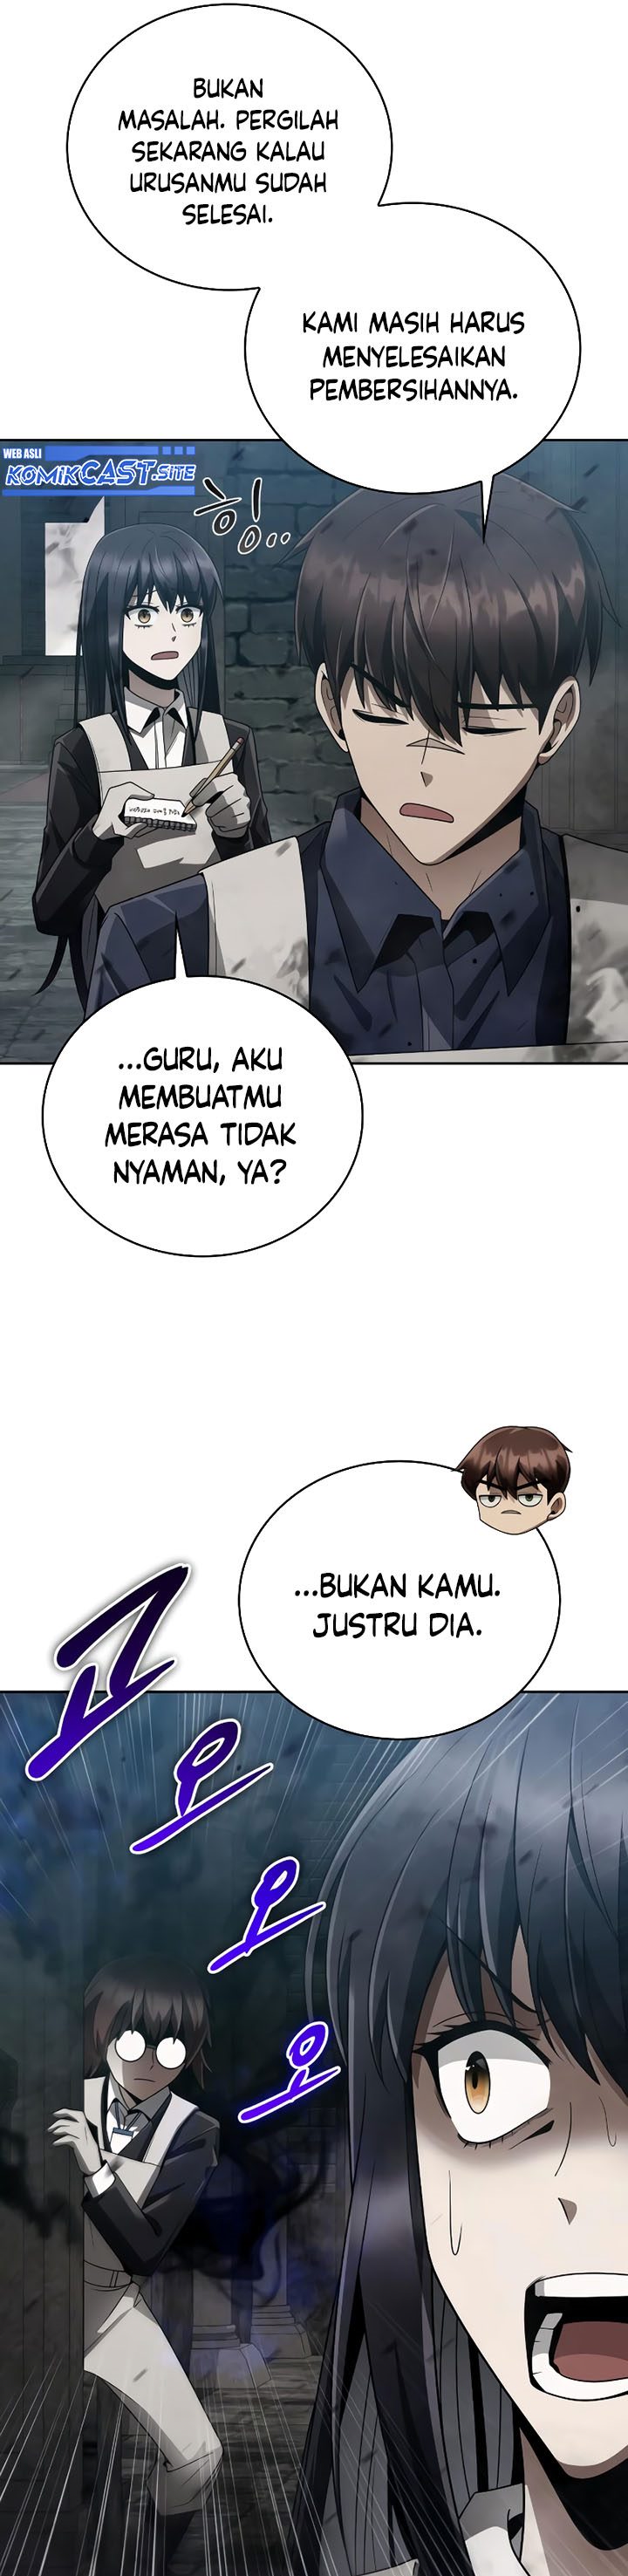 Dilarang COPAS - situs resmi www.mangacanblog.com - Komik clever cleaning life of the returned genius hunter 019 - chapter 19 20 Indonesia clever cleaning life of the returned genius hunter 019 - chapter 19 Terbaru 13|Baca Manga Komik Indonesia|Mangacan